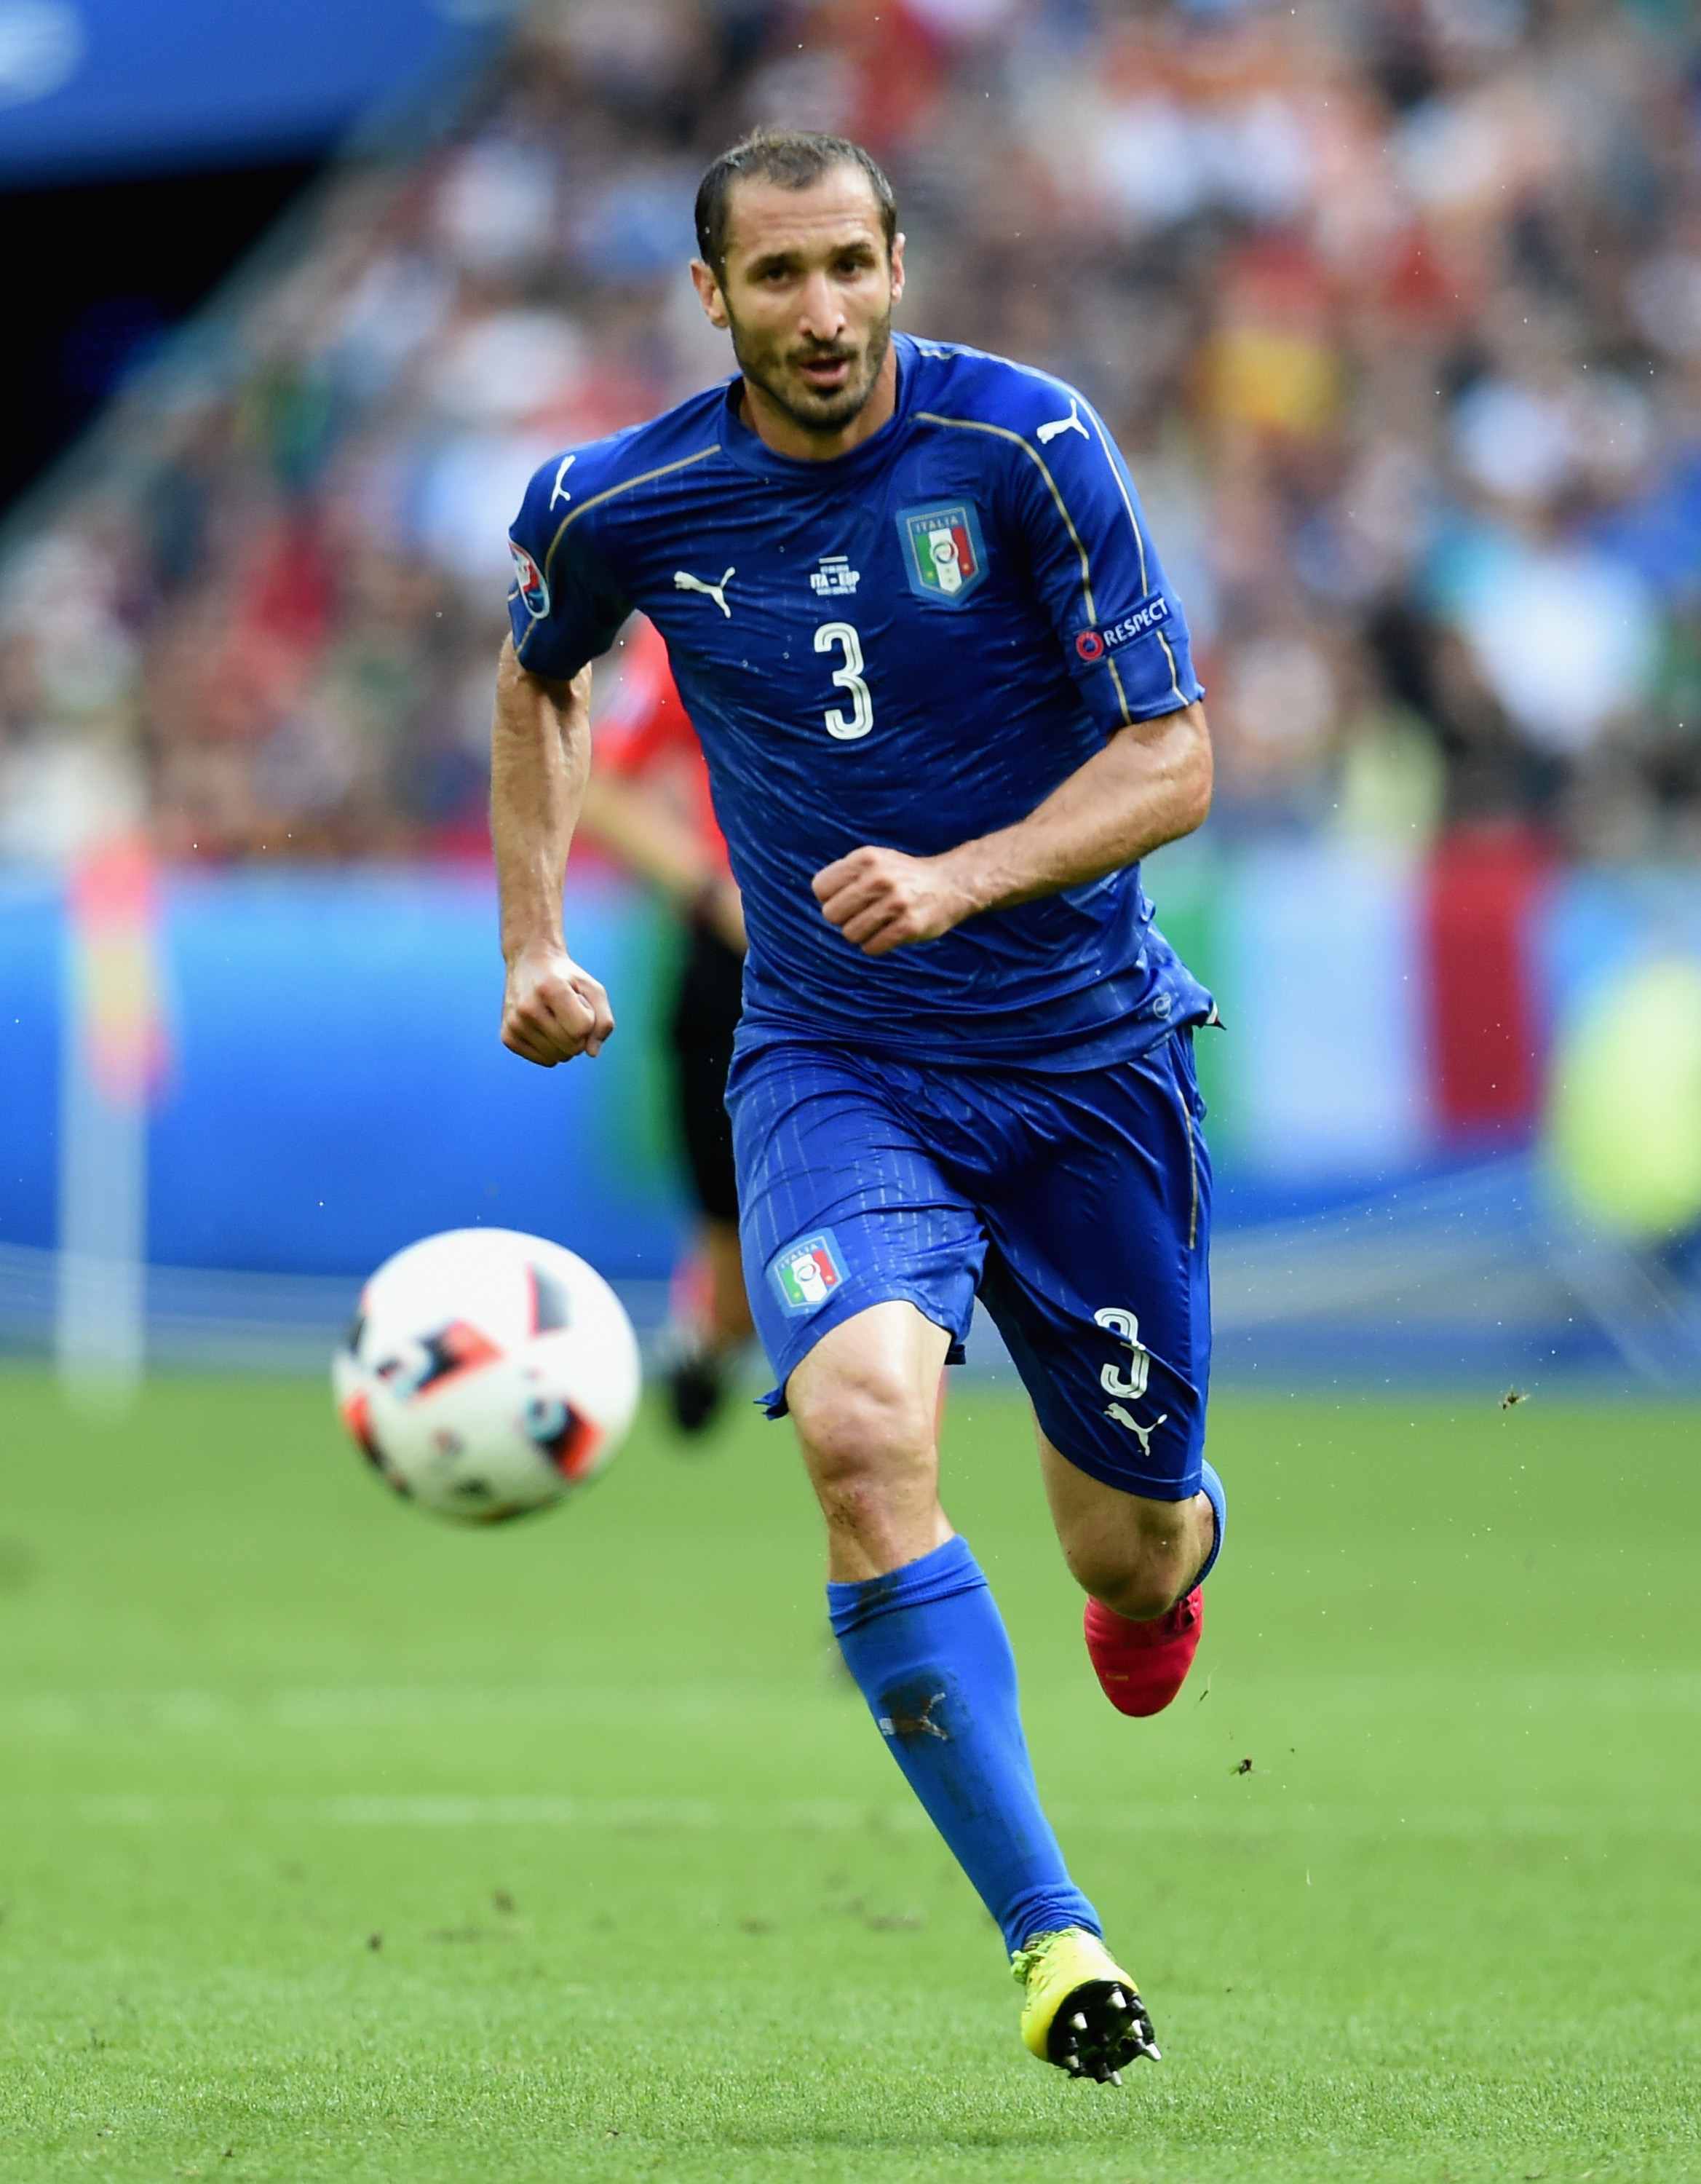 Chiellini is the heart of a powerful Italian defence.